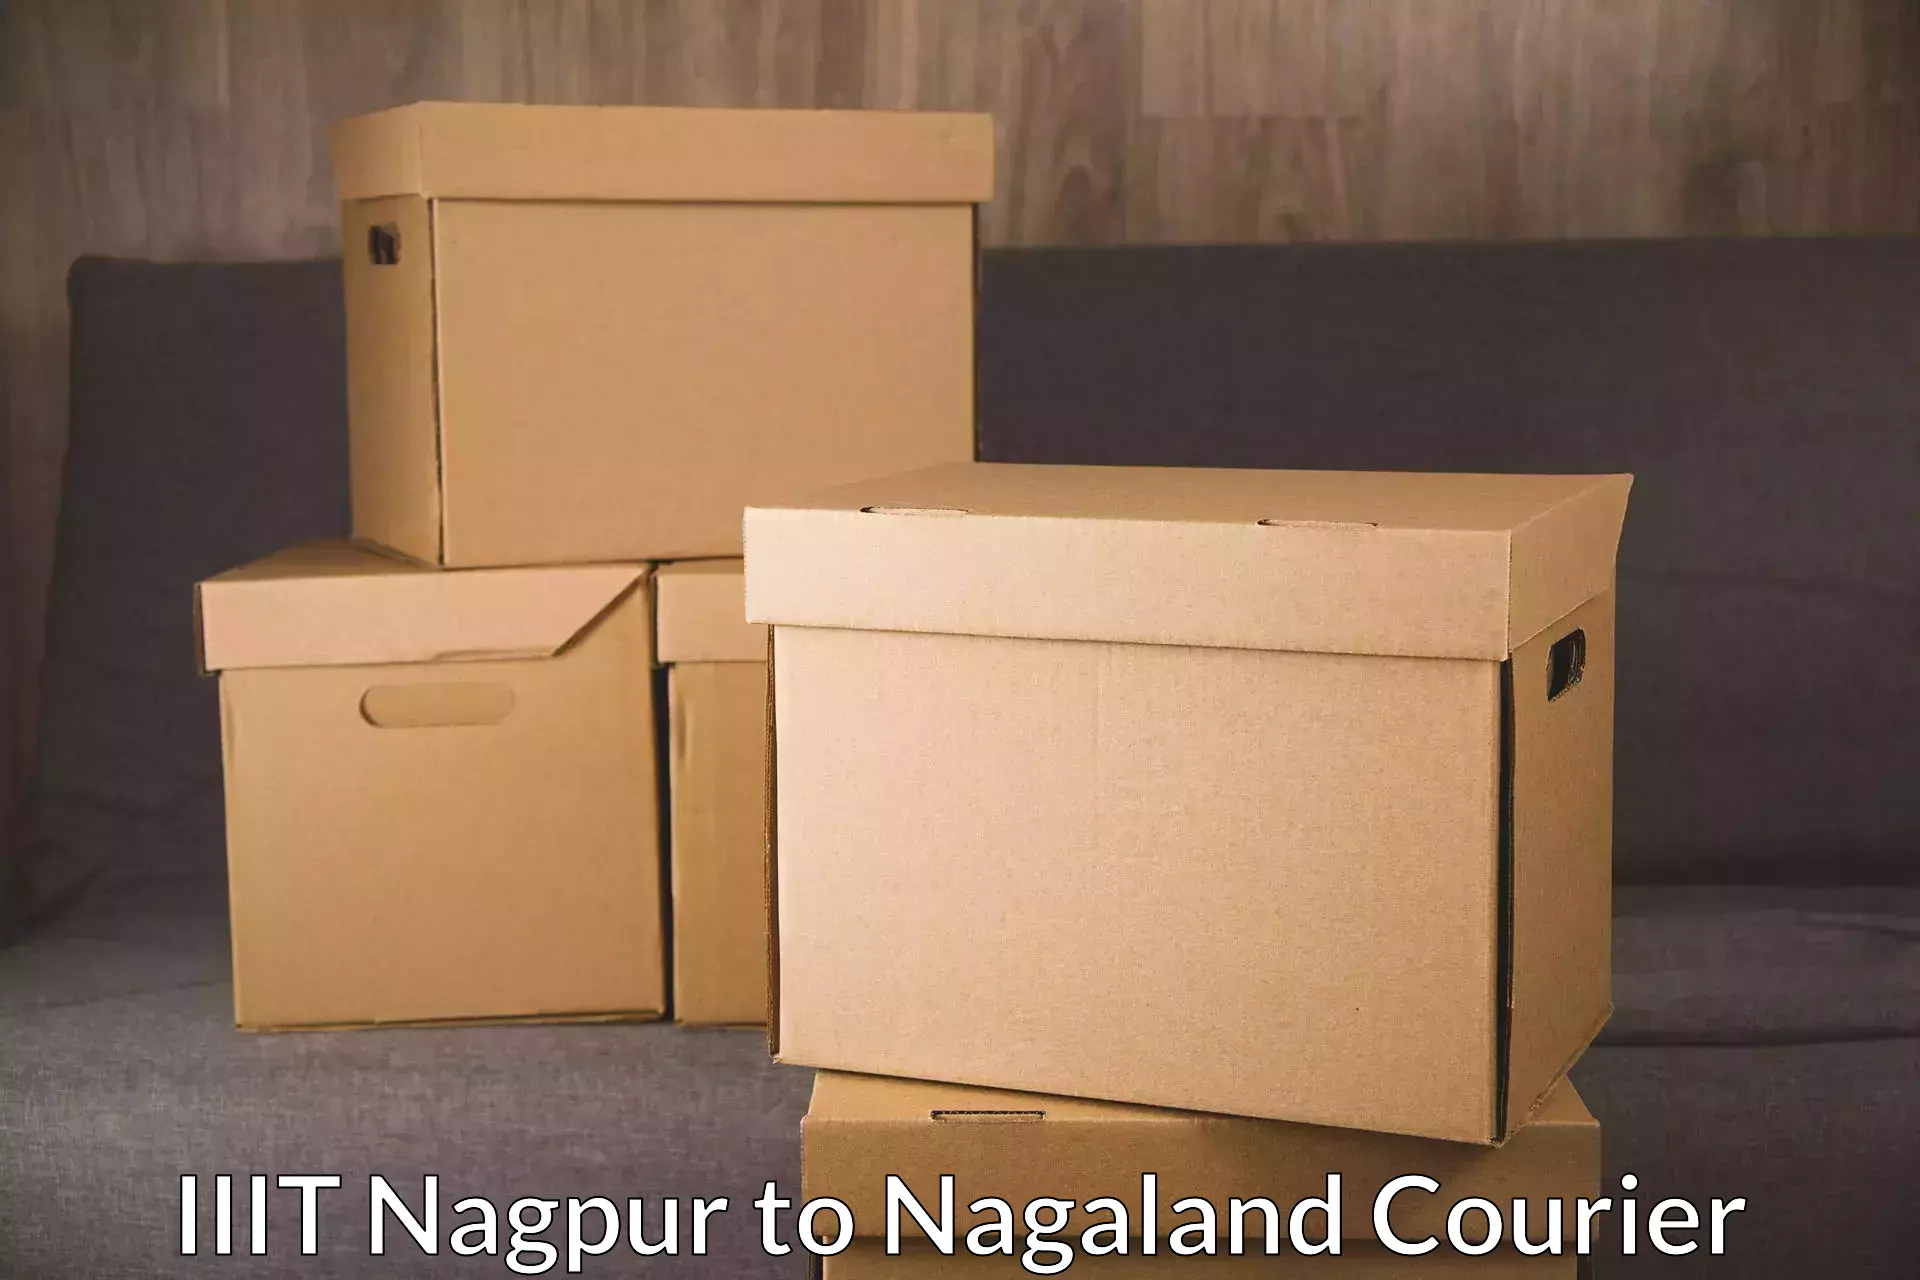 Express delivery network IIIT Nagpur to Nagaland